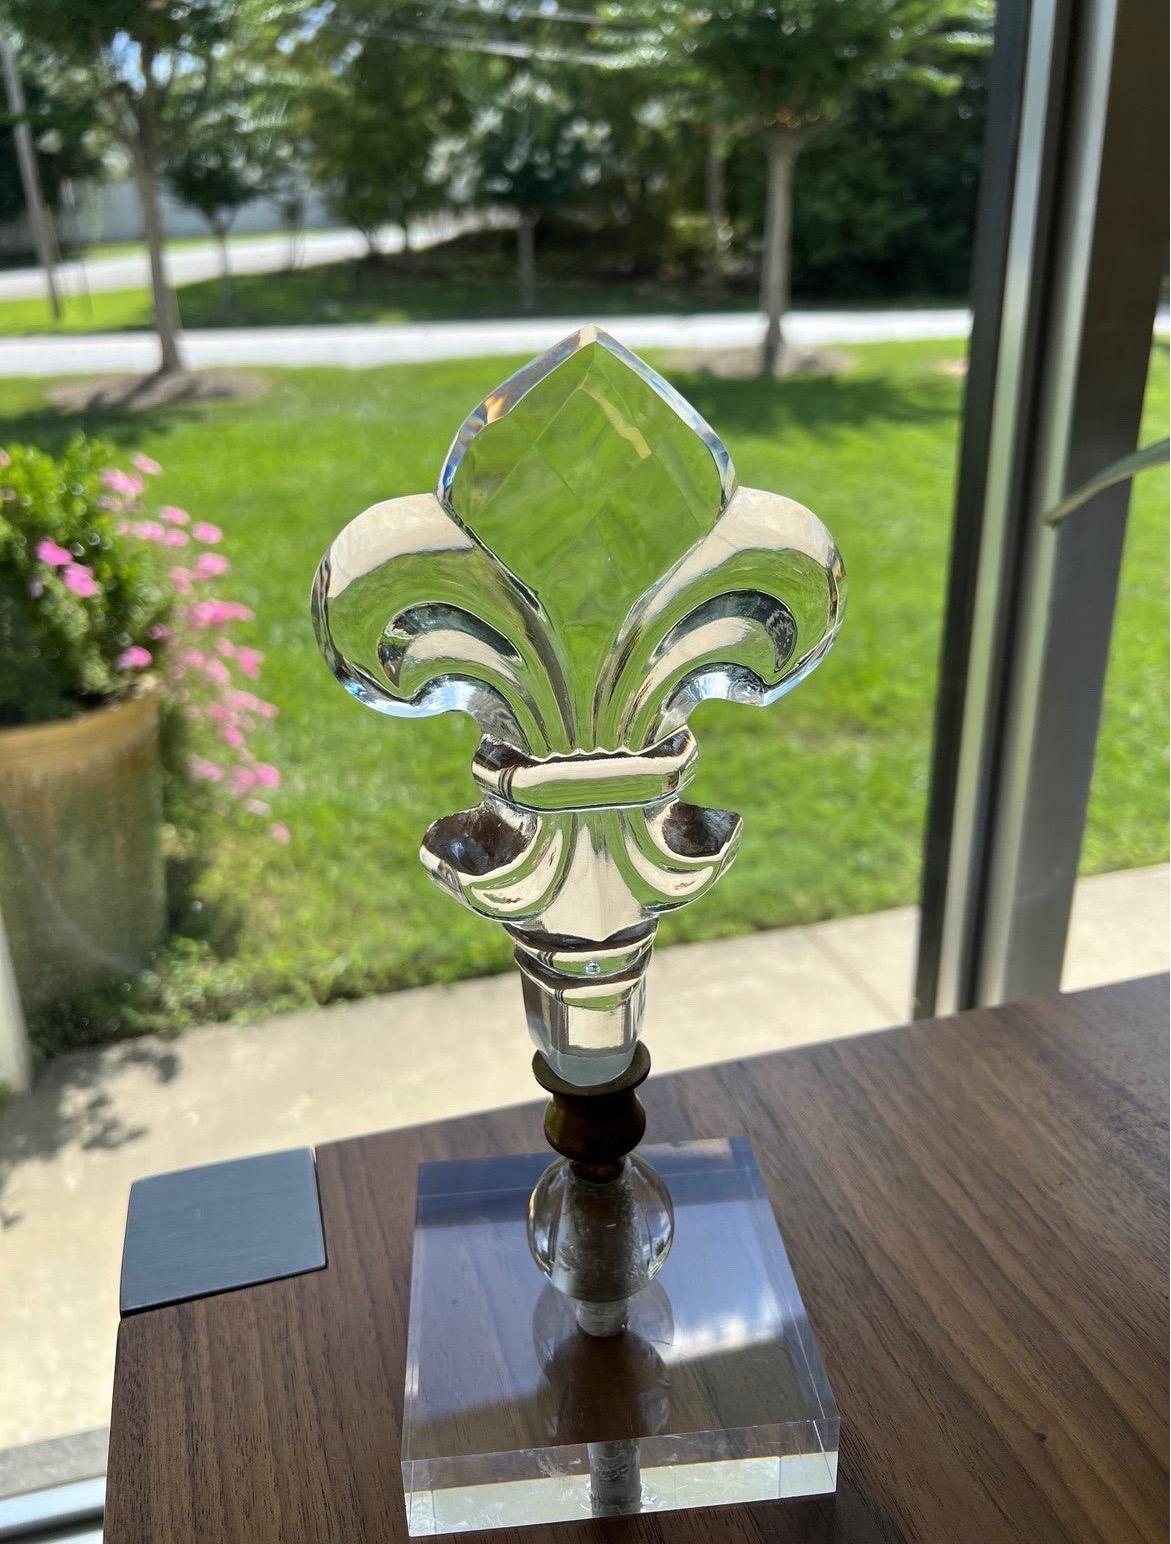 Beautiful glass fleur de lis finials previously architectural salvage and mounted to lucite bases. Several available.